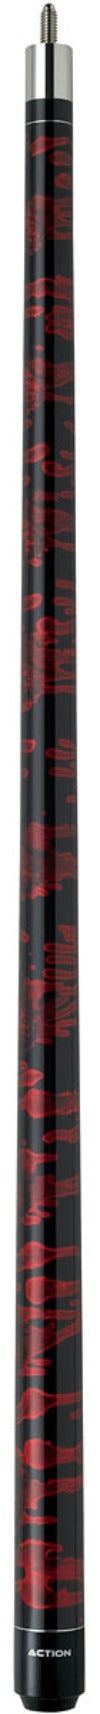 Action VAL03 Pool Cue